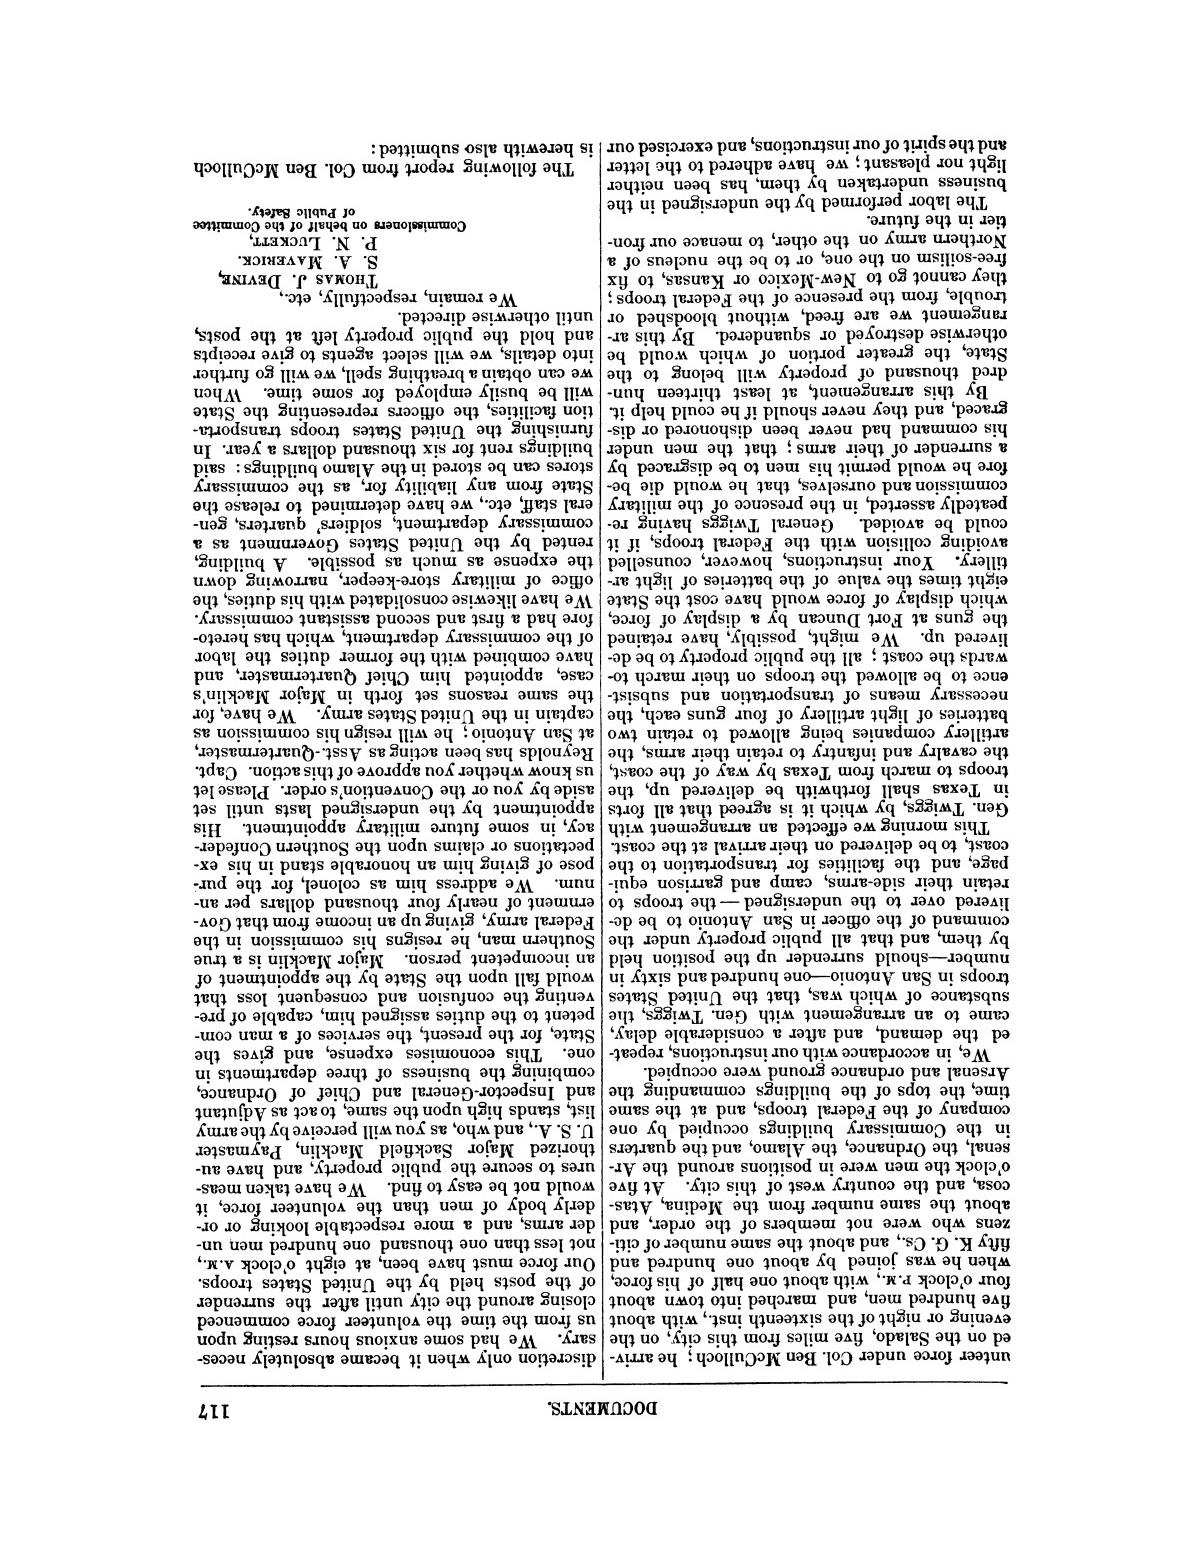 The treachery in Texas, the secession of Texas, and the arrest of the United States officers and soldiers serving in Texas. Read before the New-York Historical Society, June 25, 1861. By Major J. T. Sprague, U. S. A.
                                                
                                                    [Sequence #]: 11 of 36
                                                